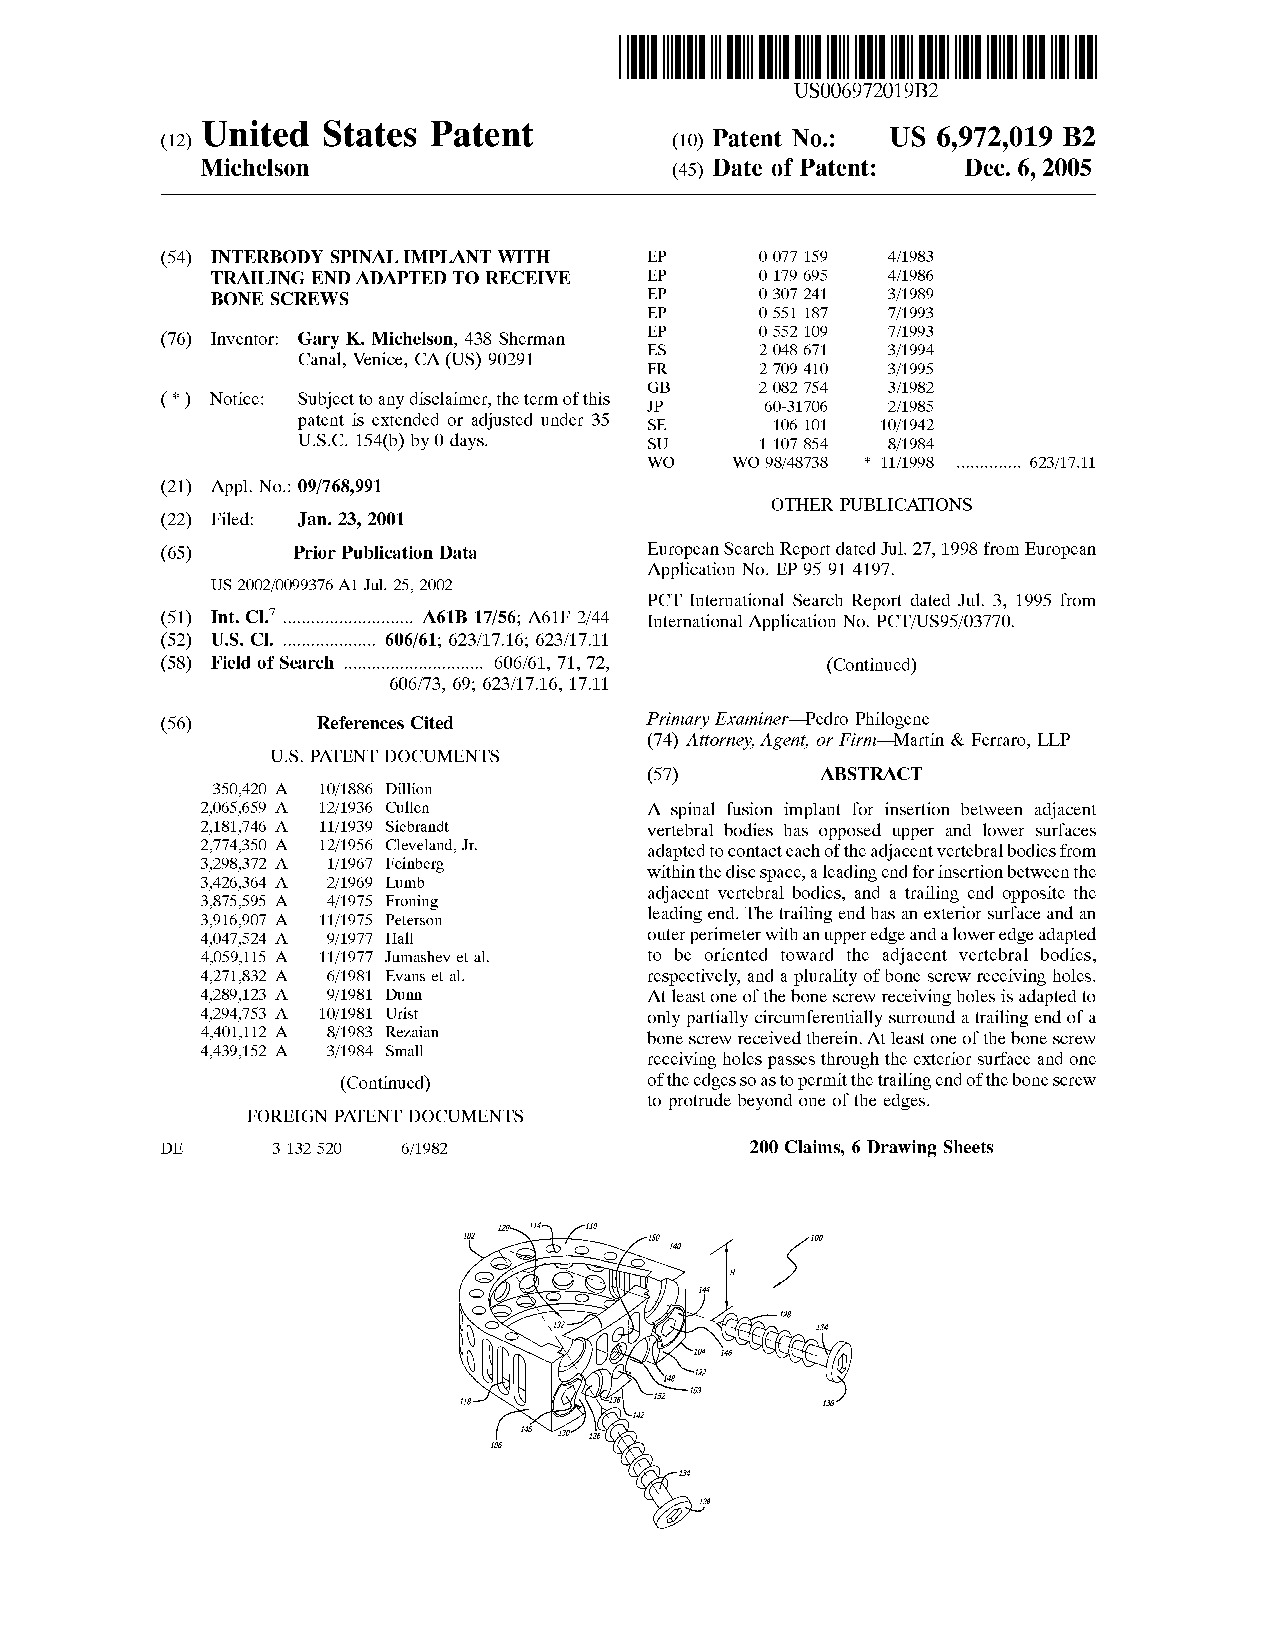 Interbody spinal implant with trailing end adapted to receive bone screws - Patent 6,972,019